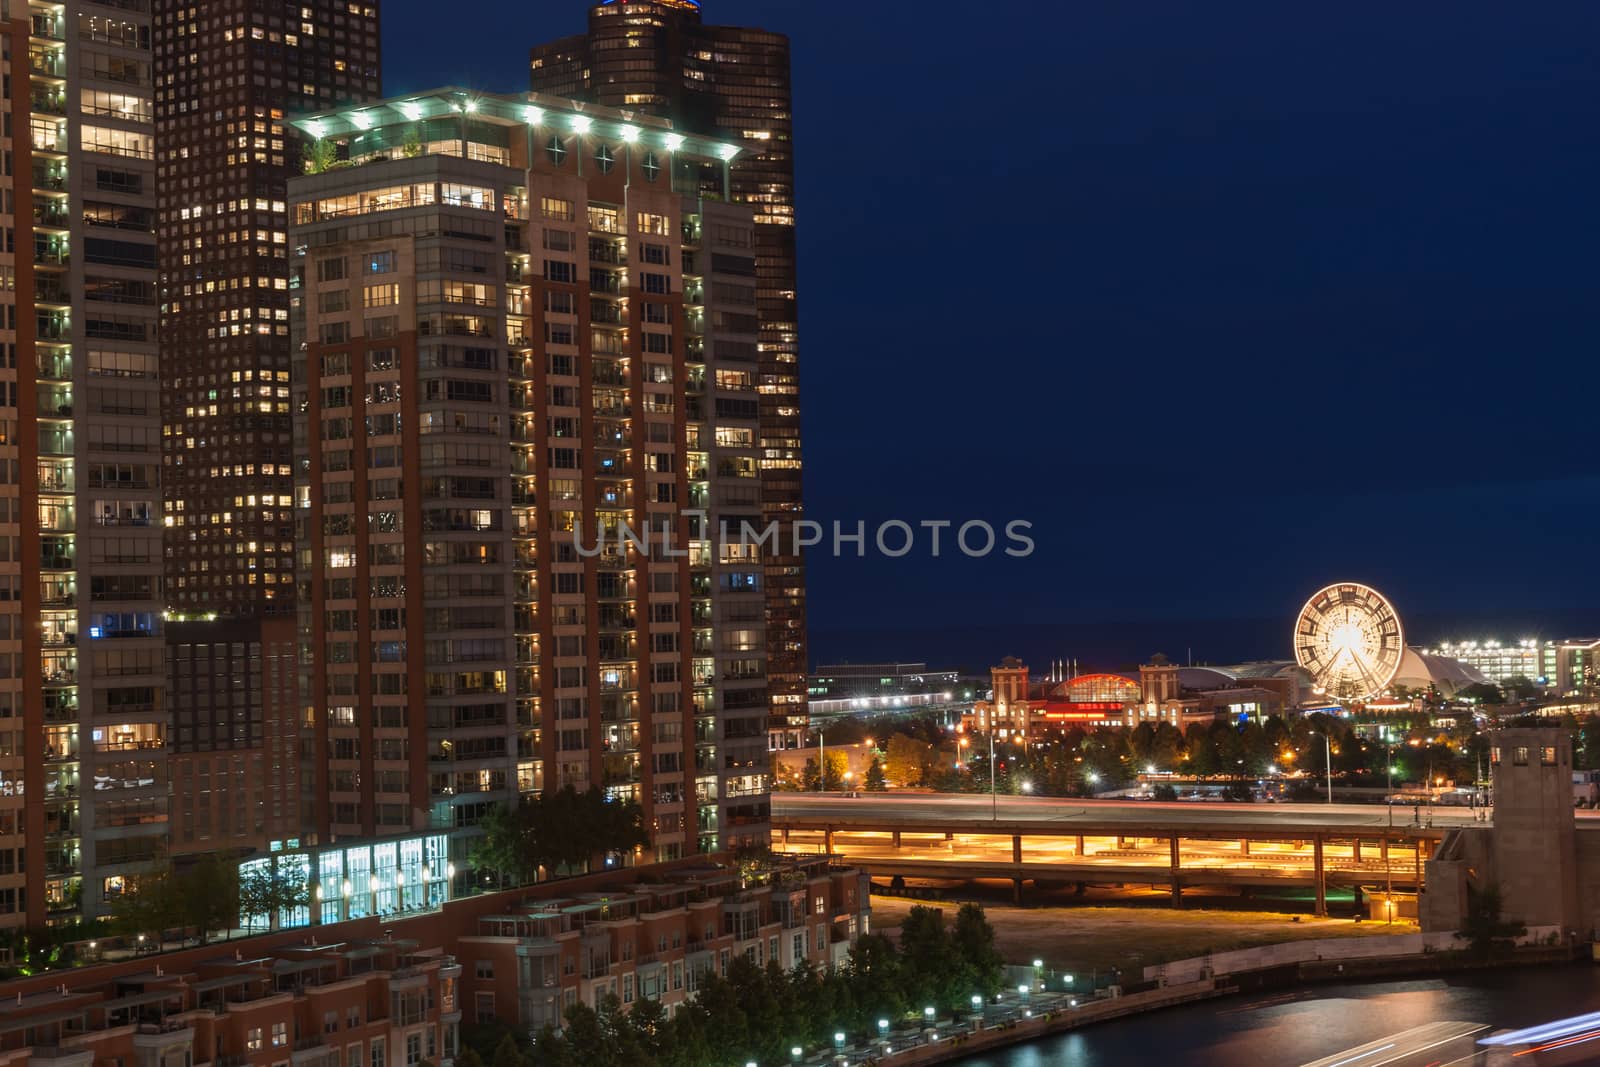 Chicago buildings, overground railway, urban road and lights str by brians101